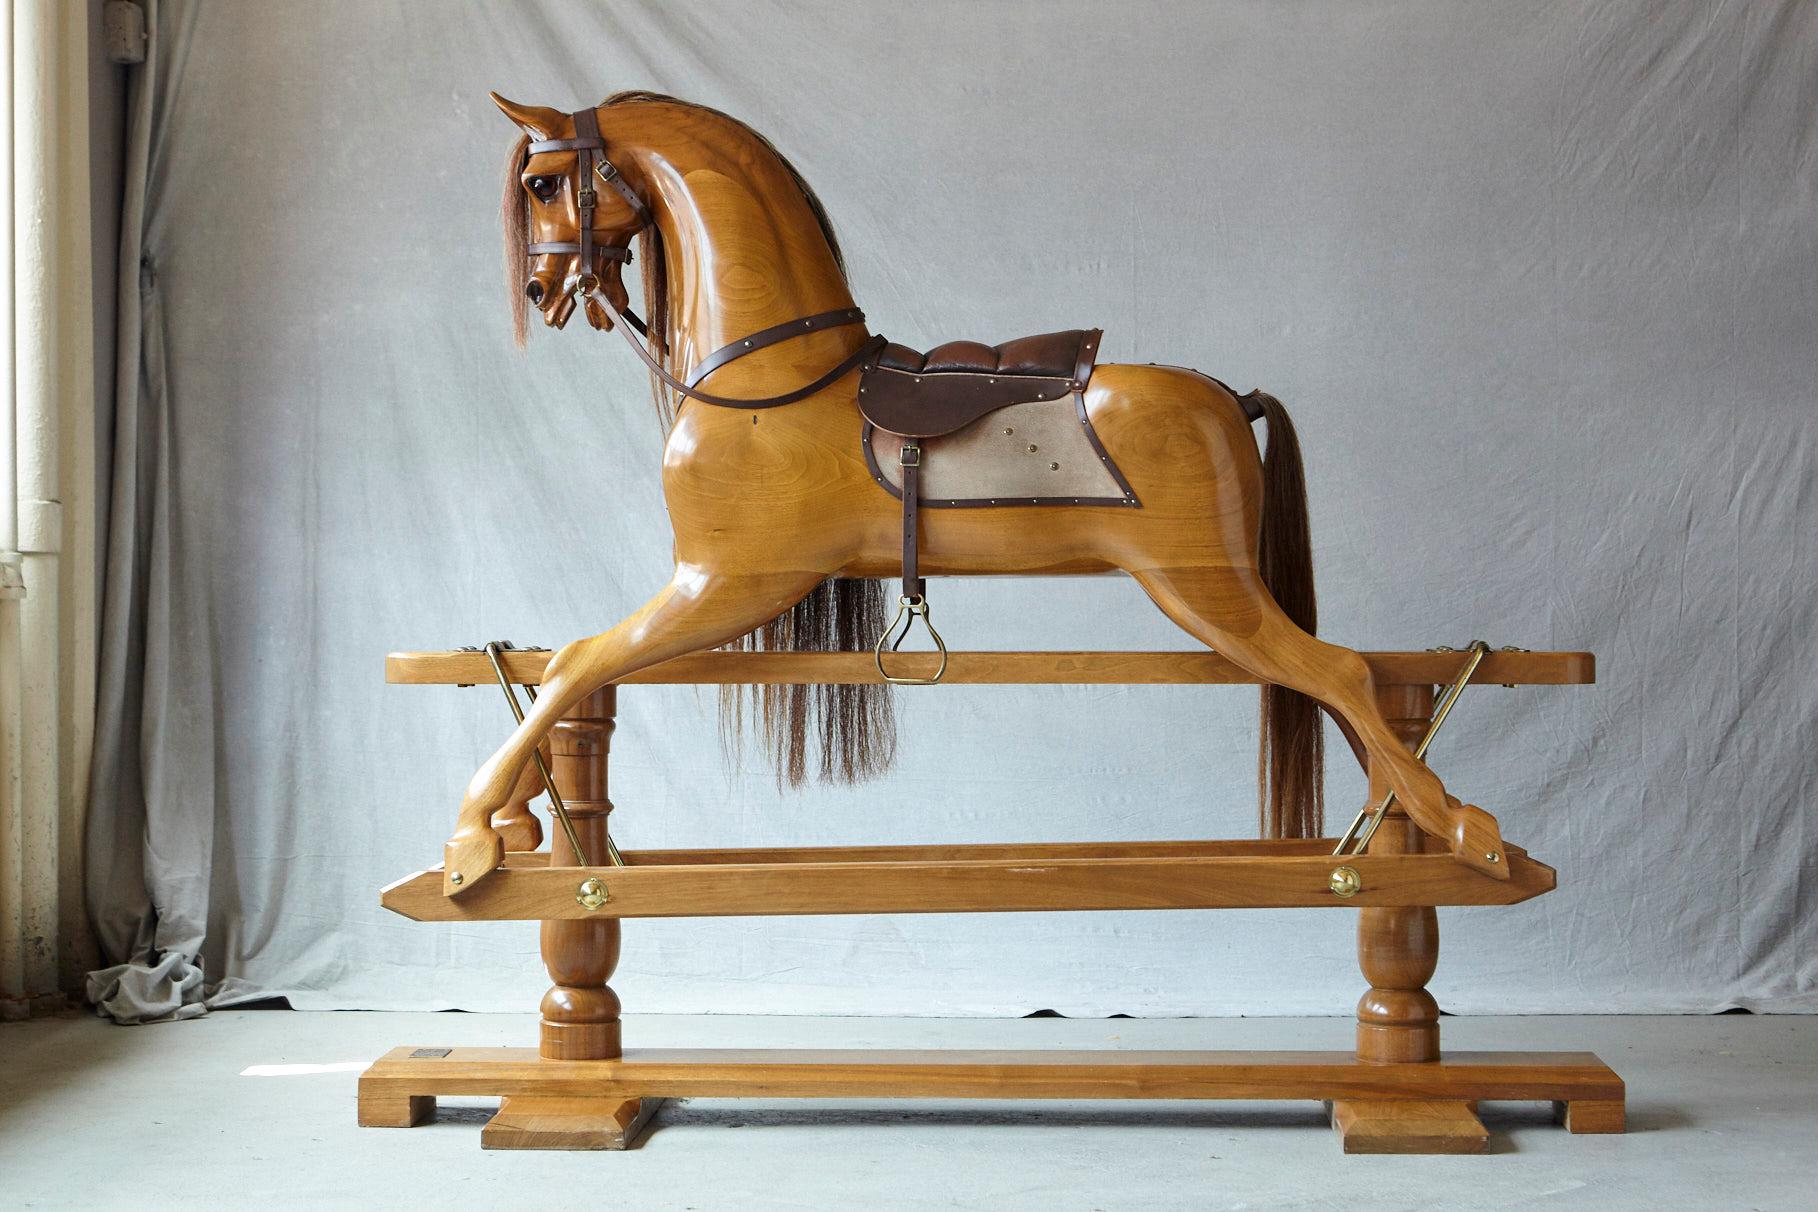 Impressive extra large 70 inches long! Custom made light oak rocking horse, hand-carved by Stevenson Brothers in Bethersden, Kent.
The hand-carved oak horse mounted as a bow rocker, has been polished with natural bees wax to create a hard wearing